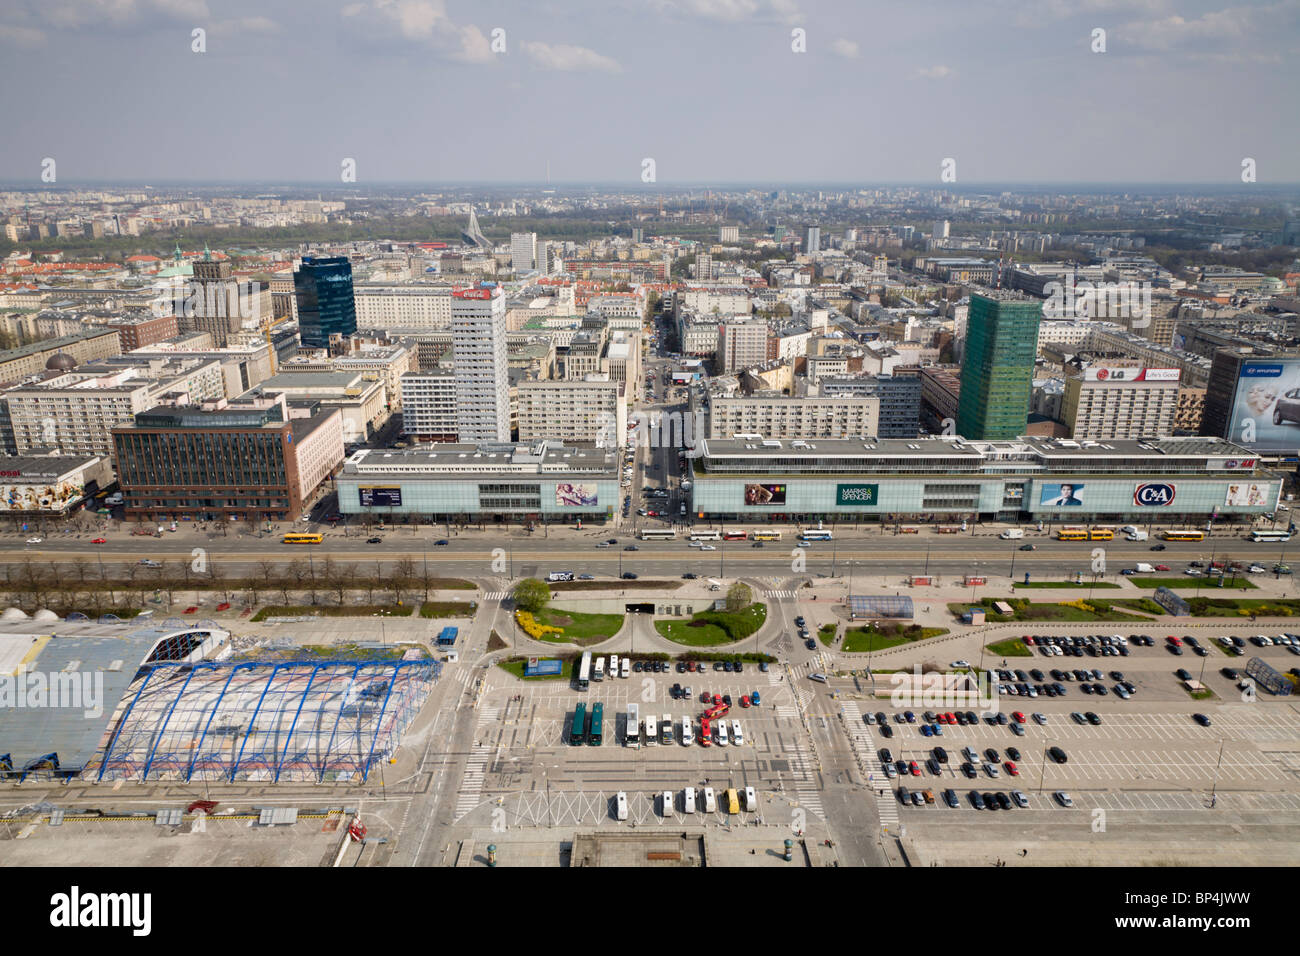 Marszalkowska street. The view is from the Palace of Culture and Science, Warsaw Poland. Stock Photo